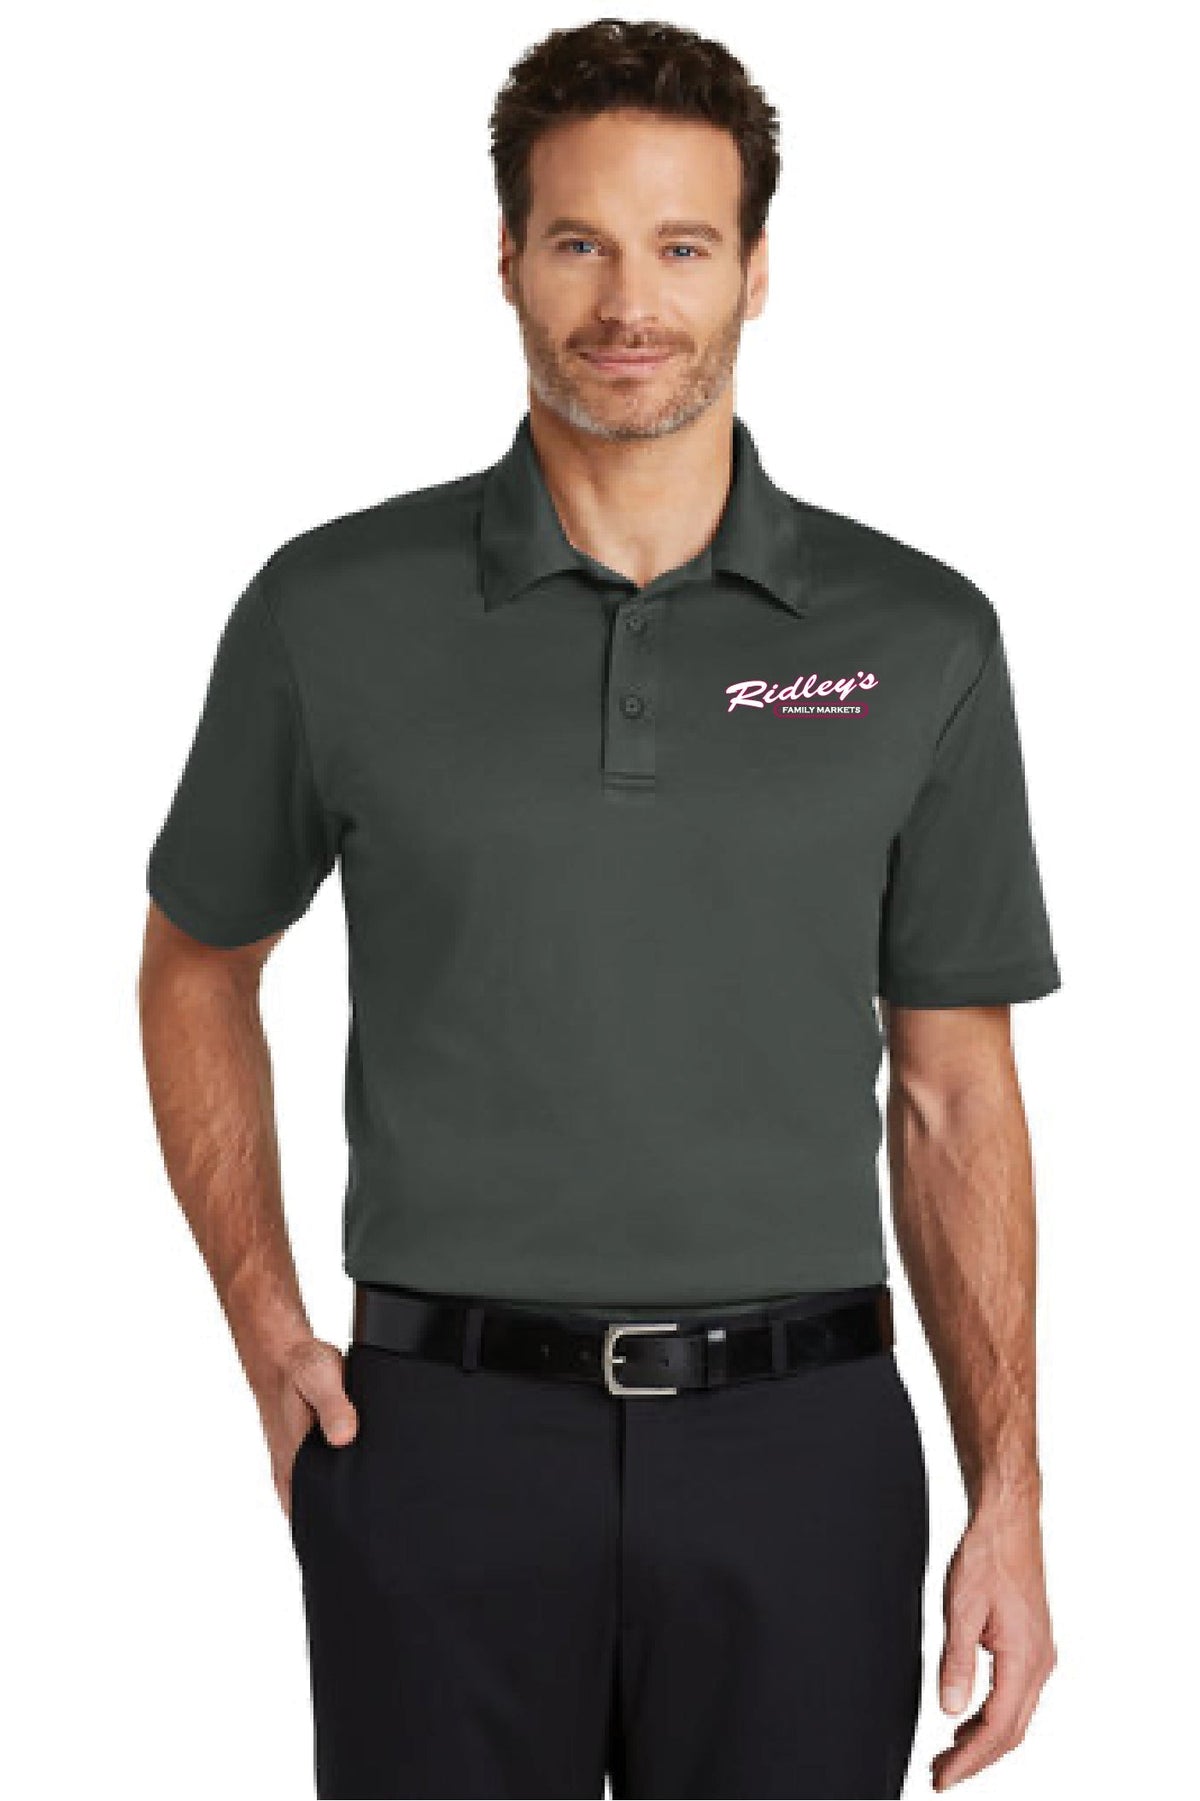 Ridley&#39;s - K540 Men&#39;s Silk Touch Performance Polo